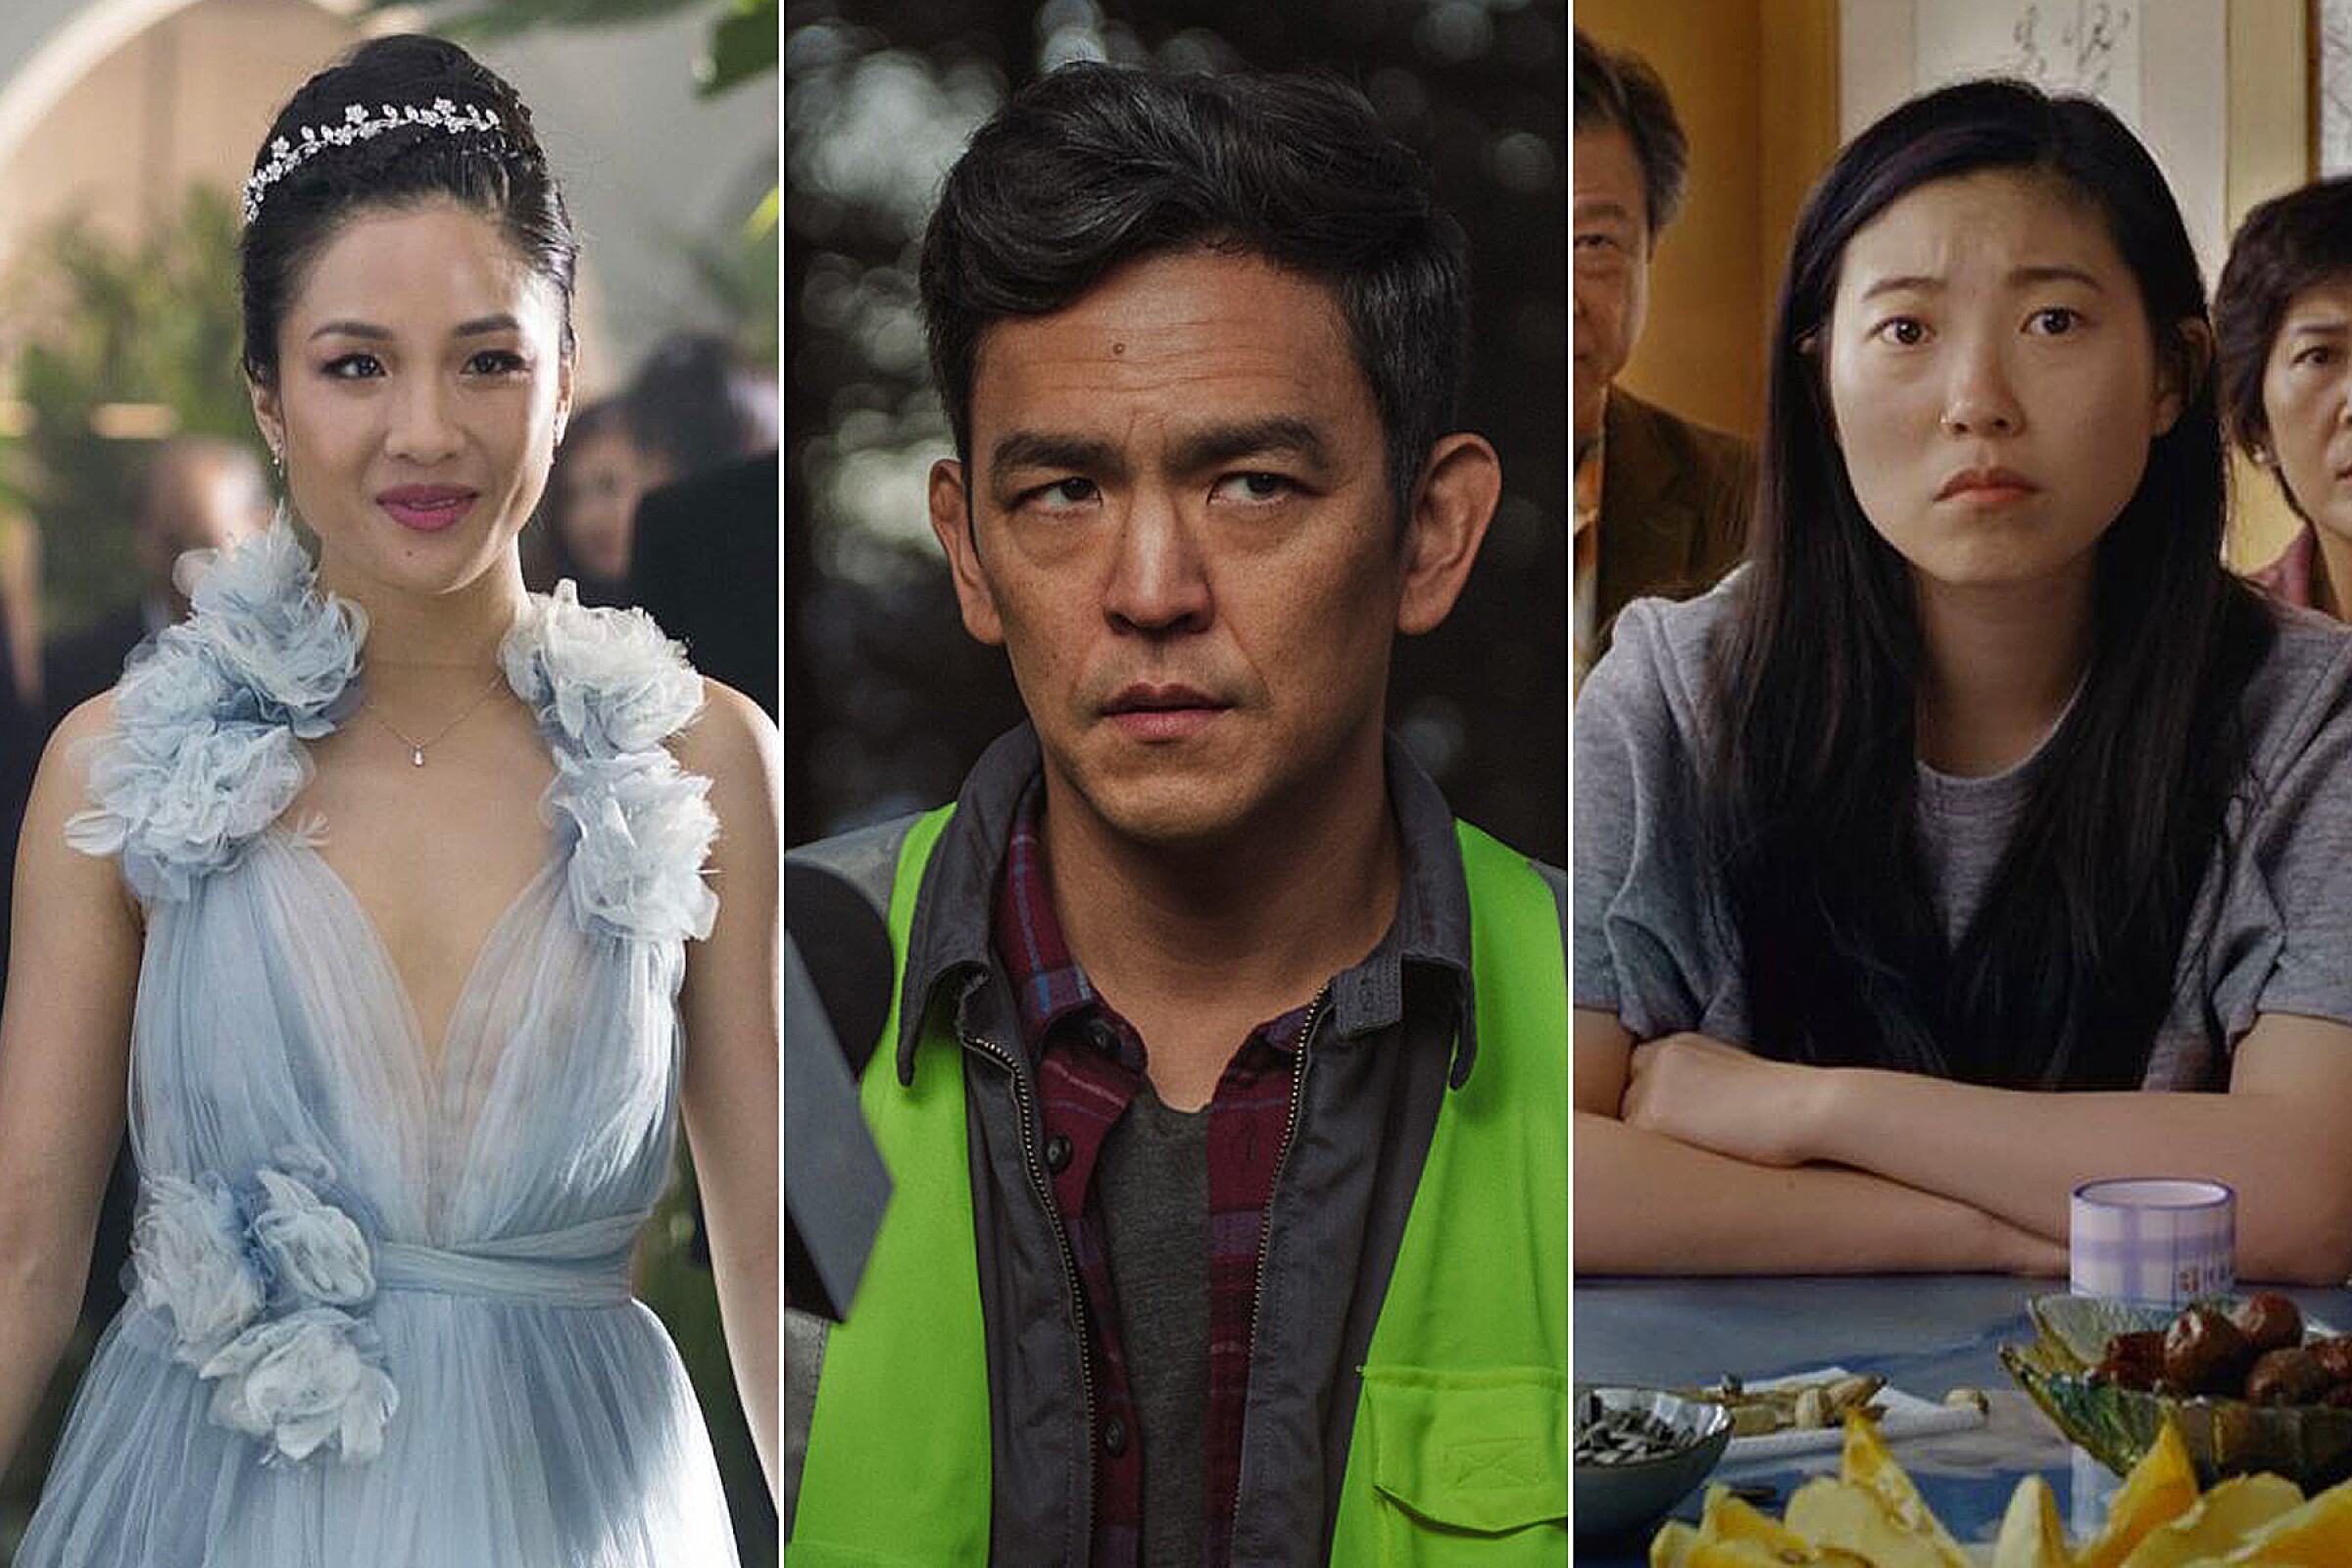 The 20 best Asian American films of the last 20 years